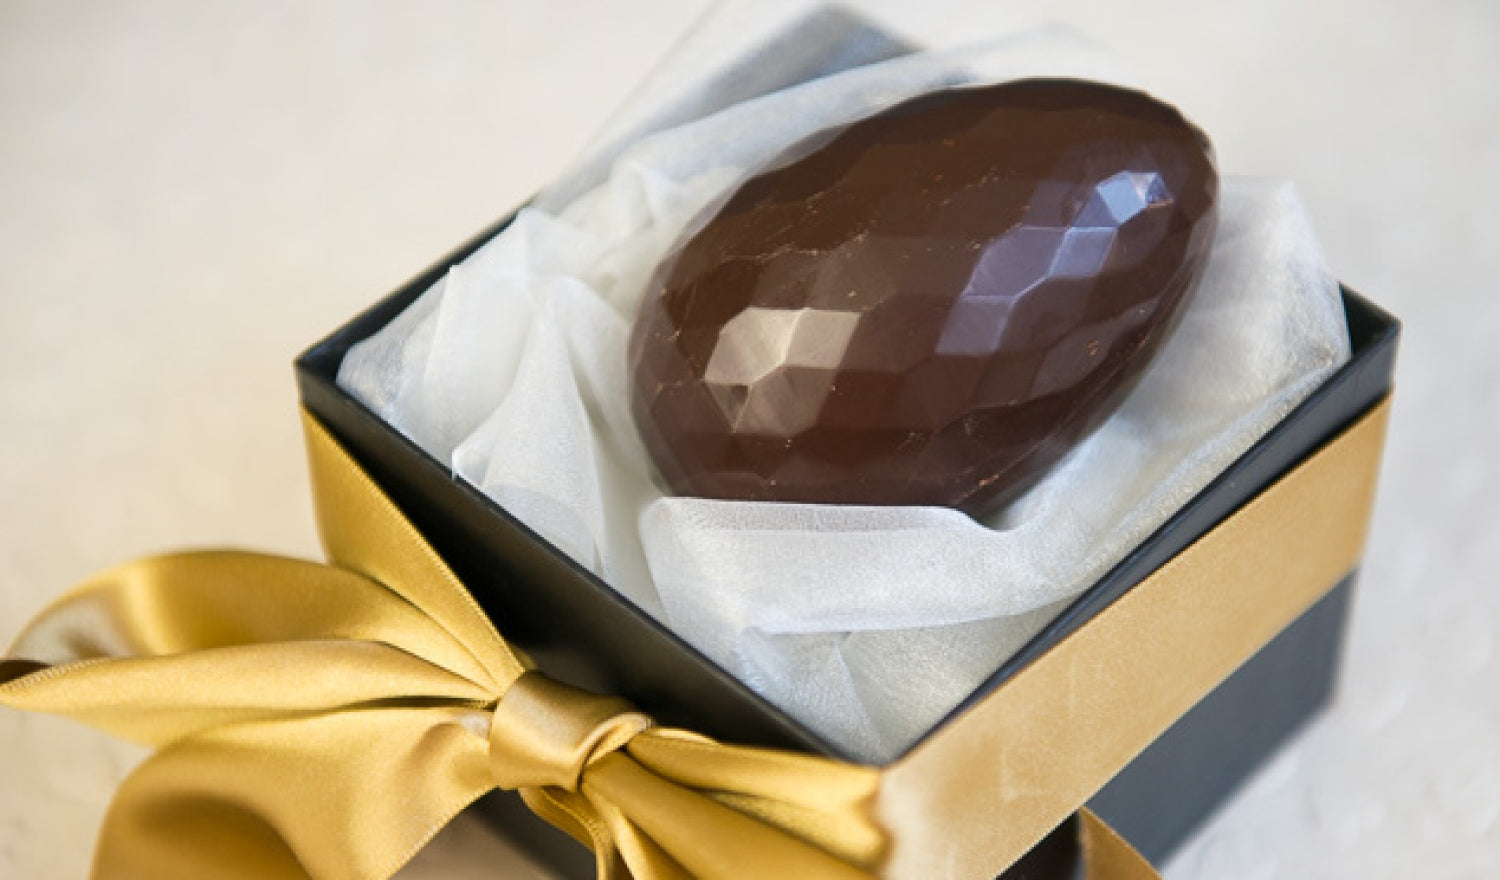 How To Make Your Own Chocolate Easter Egg